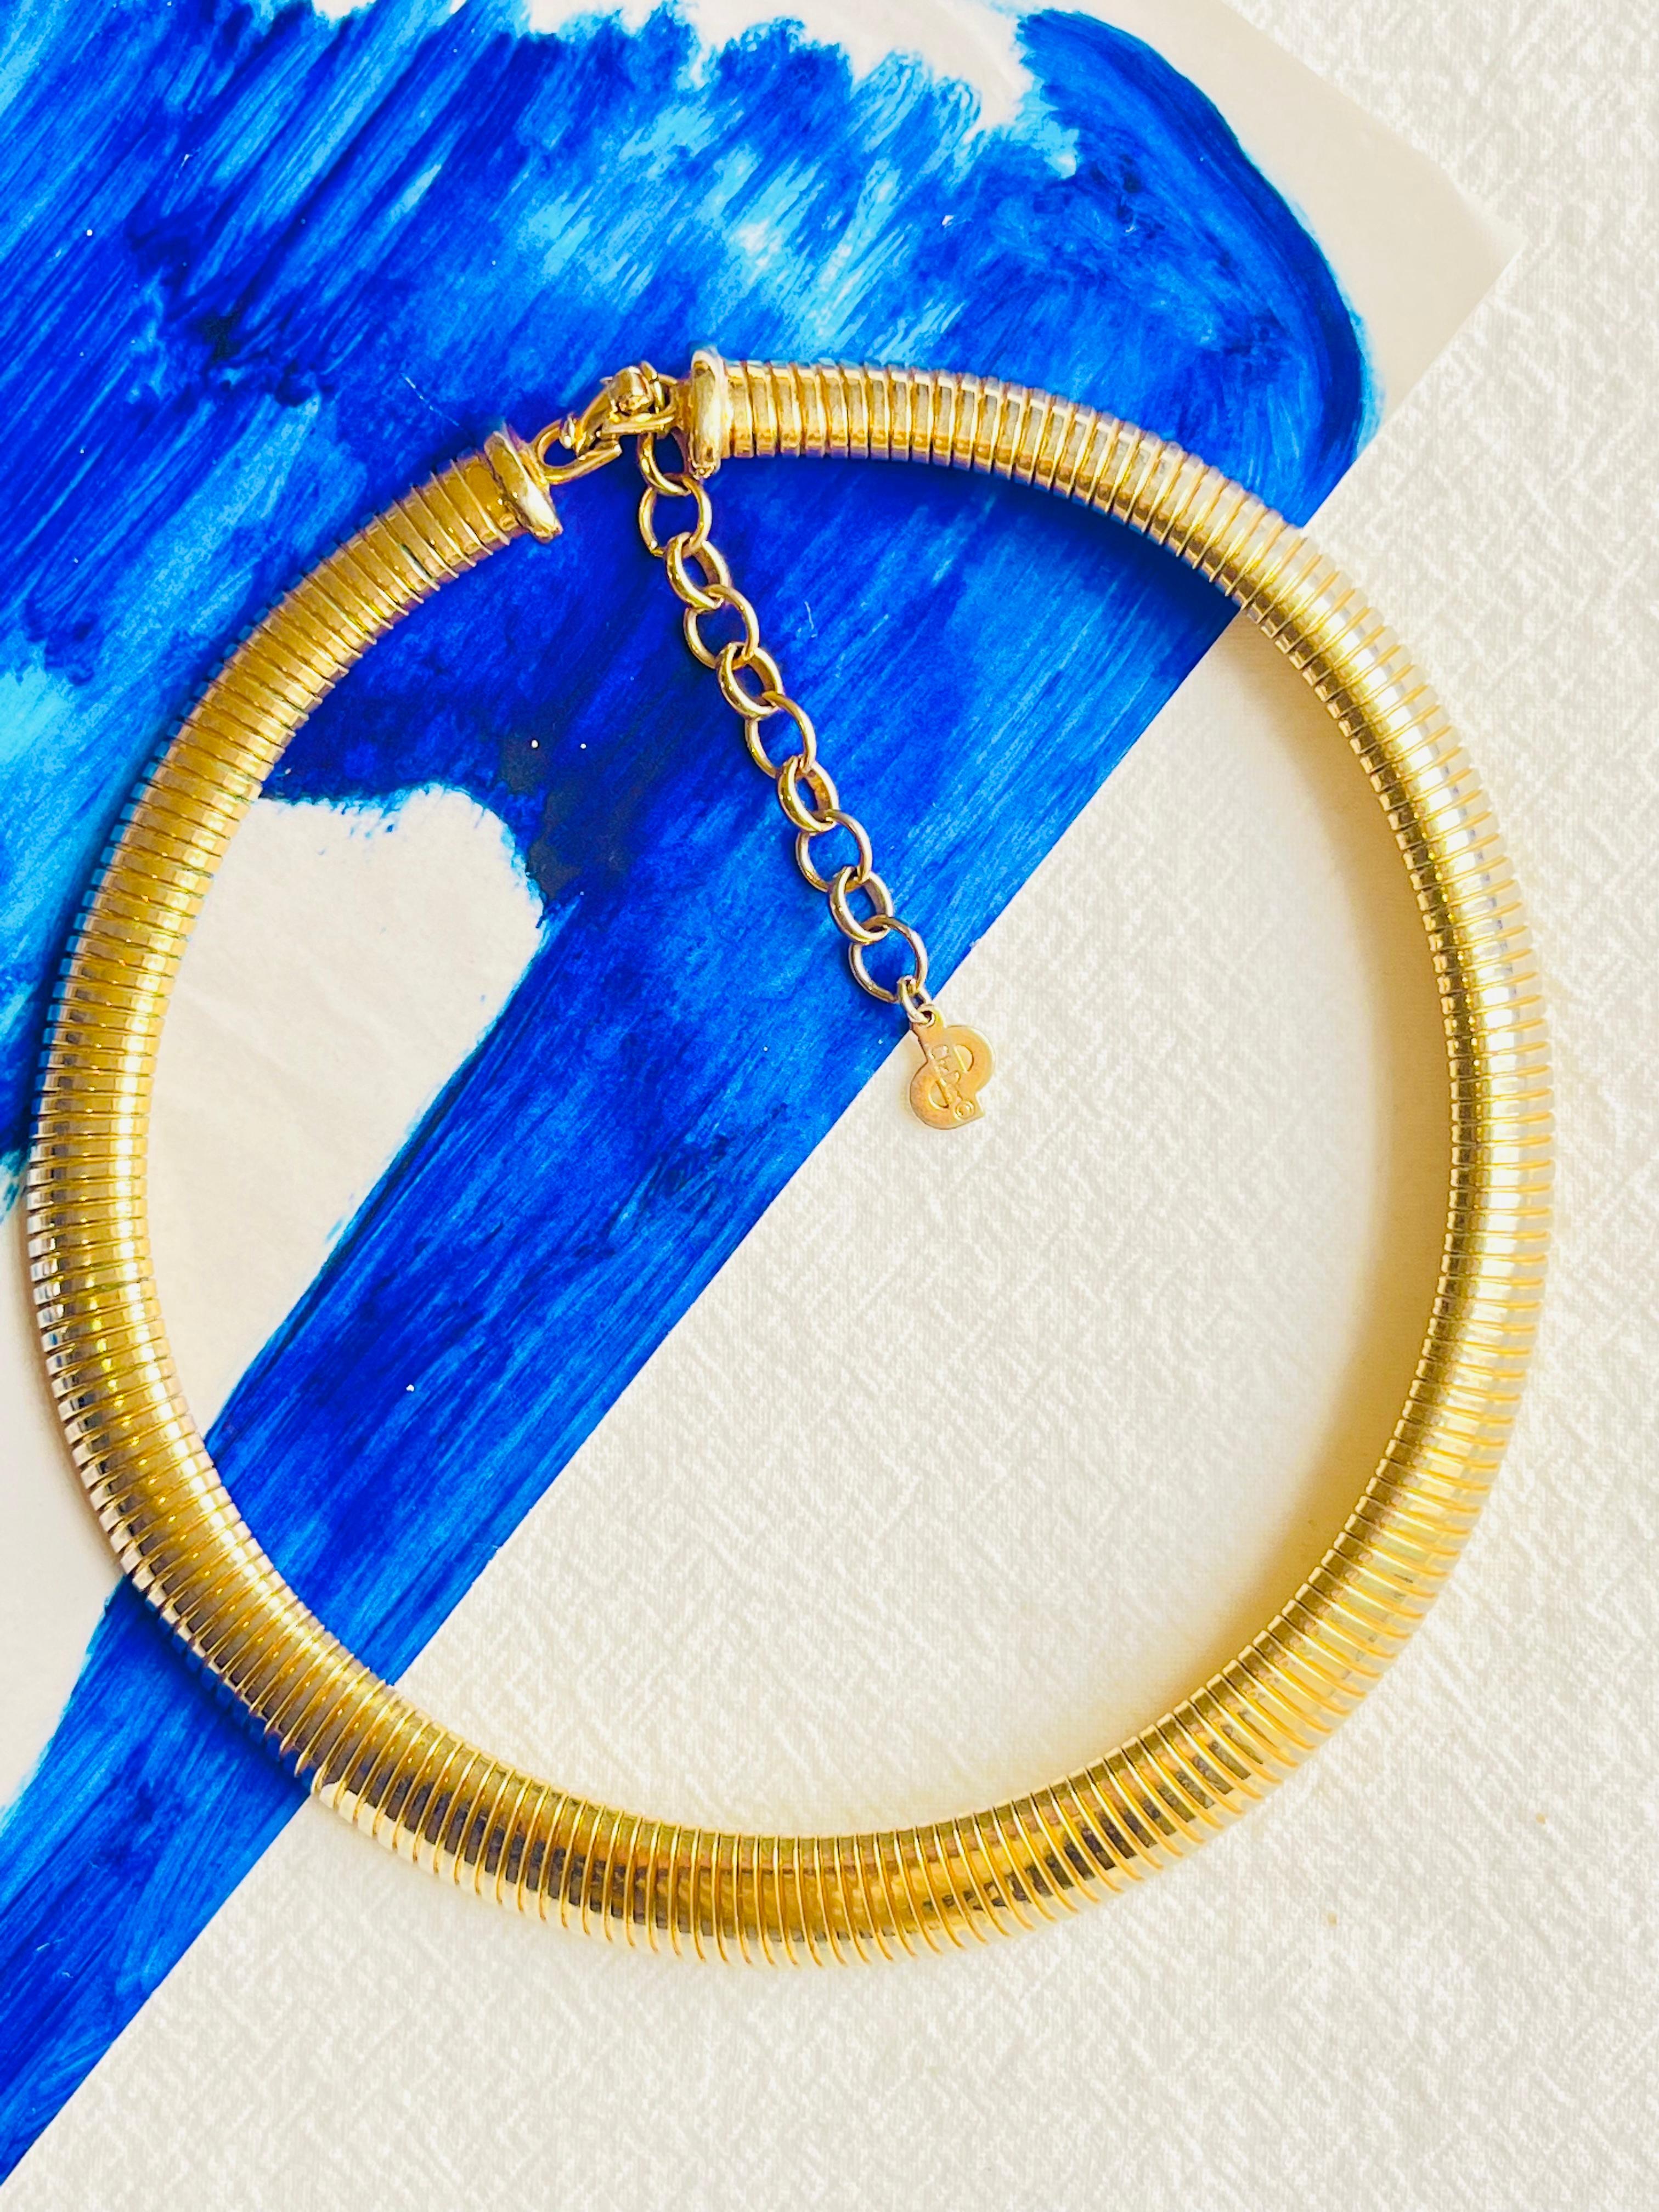 Very good condition. Only at / near clasp is some colour loss. 100% Genuine.

Crafted from polished gold plated brass with a circular design, this choker necklace from Christian Dior is finished with a ribbed textured effect.

Marked 'Chr.Dior (C)